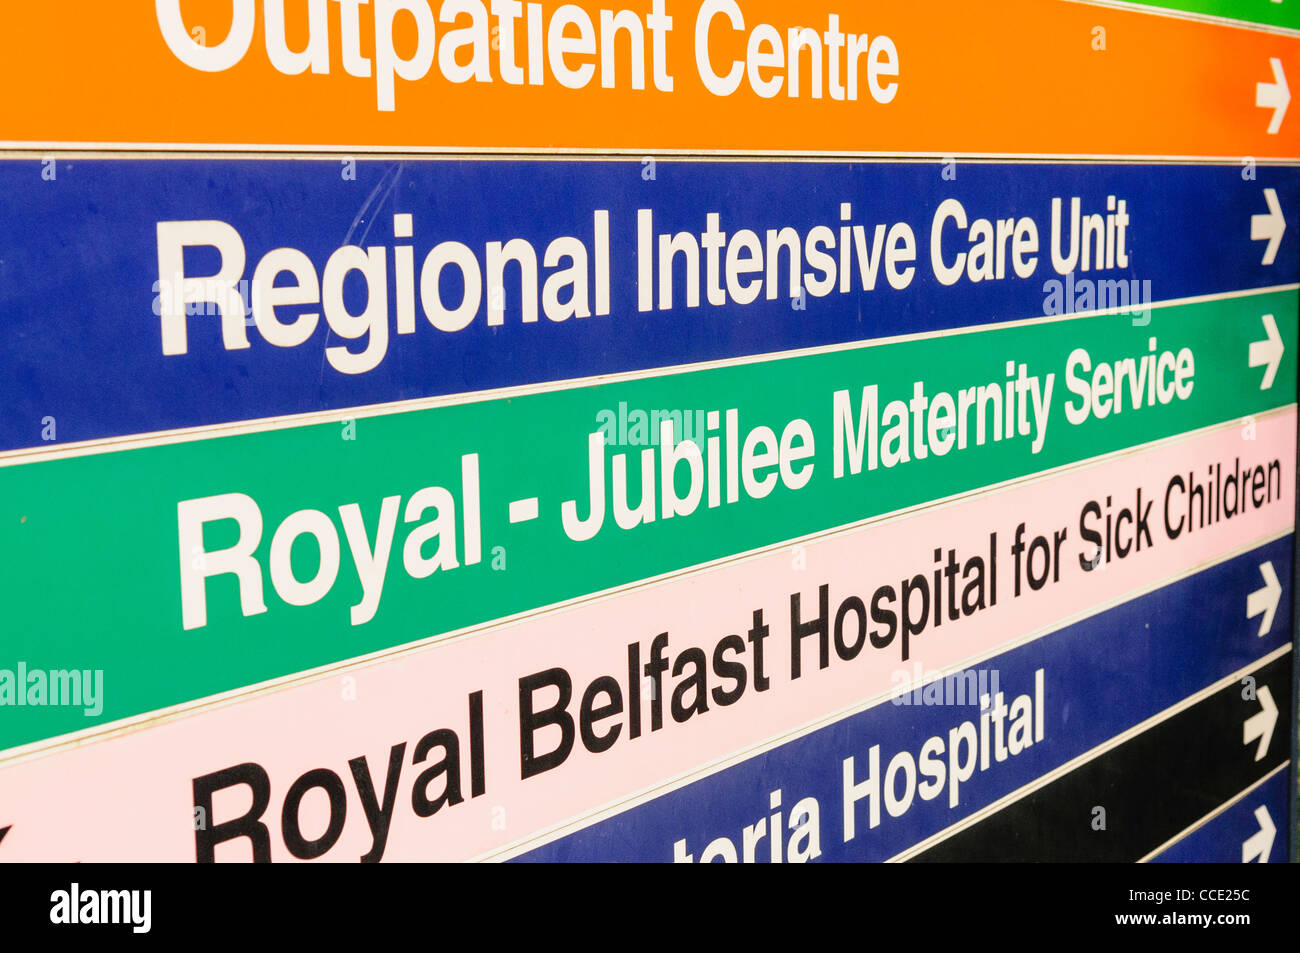 Signs at a Royal Victoria Hospital for Outpatient centre, Regional Intensive Care Unit, Royal Jubilee Maternity Service Stock Photo